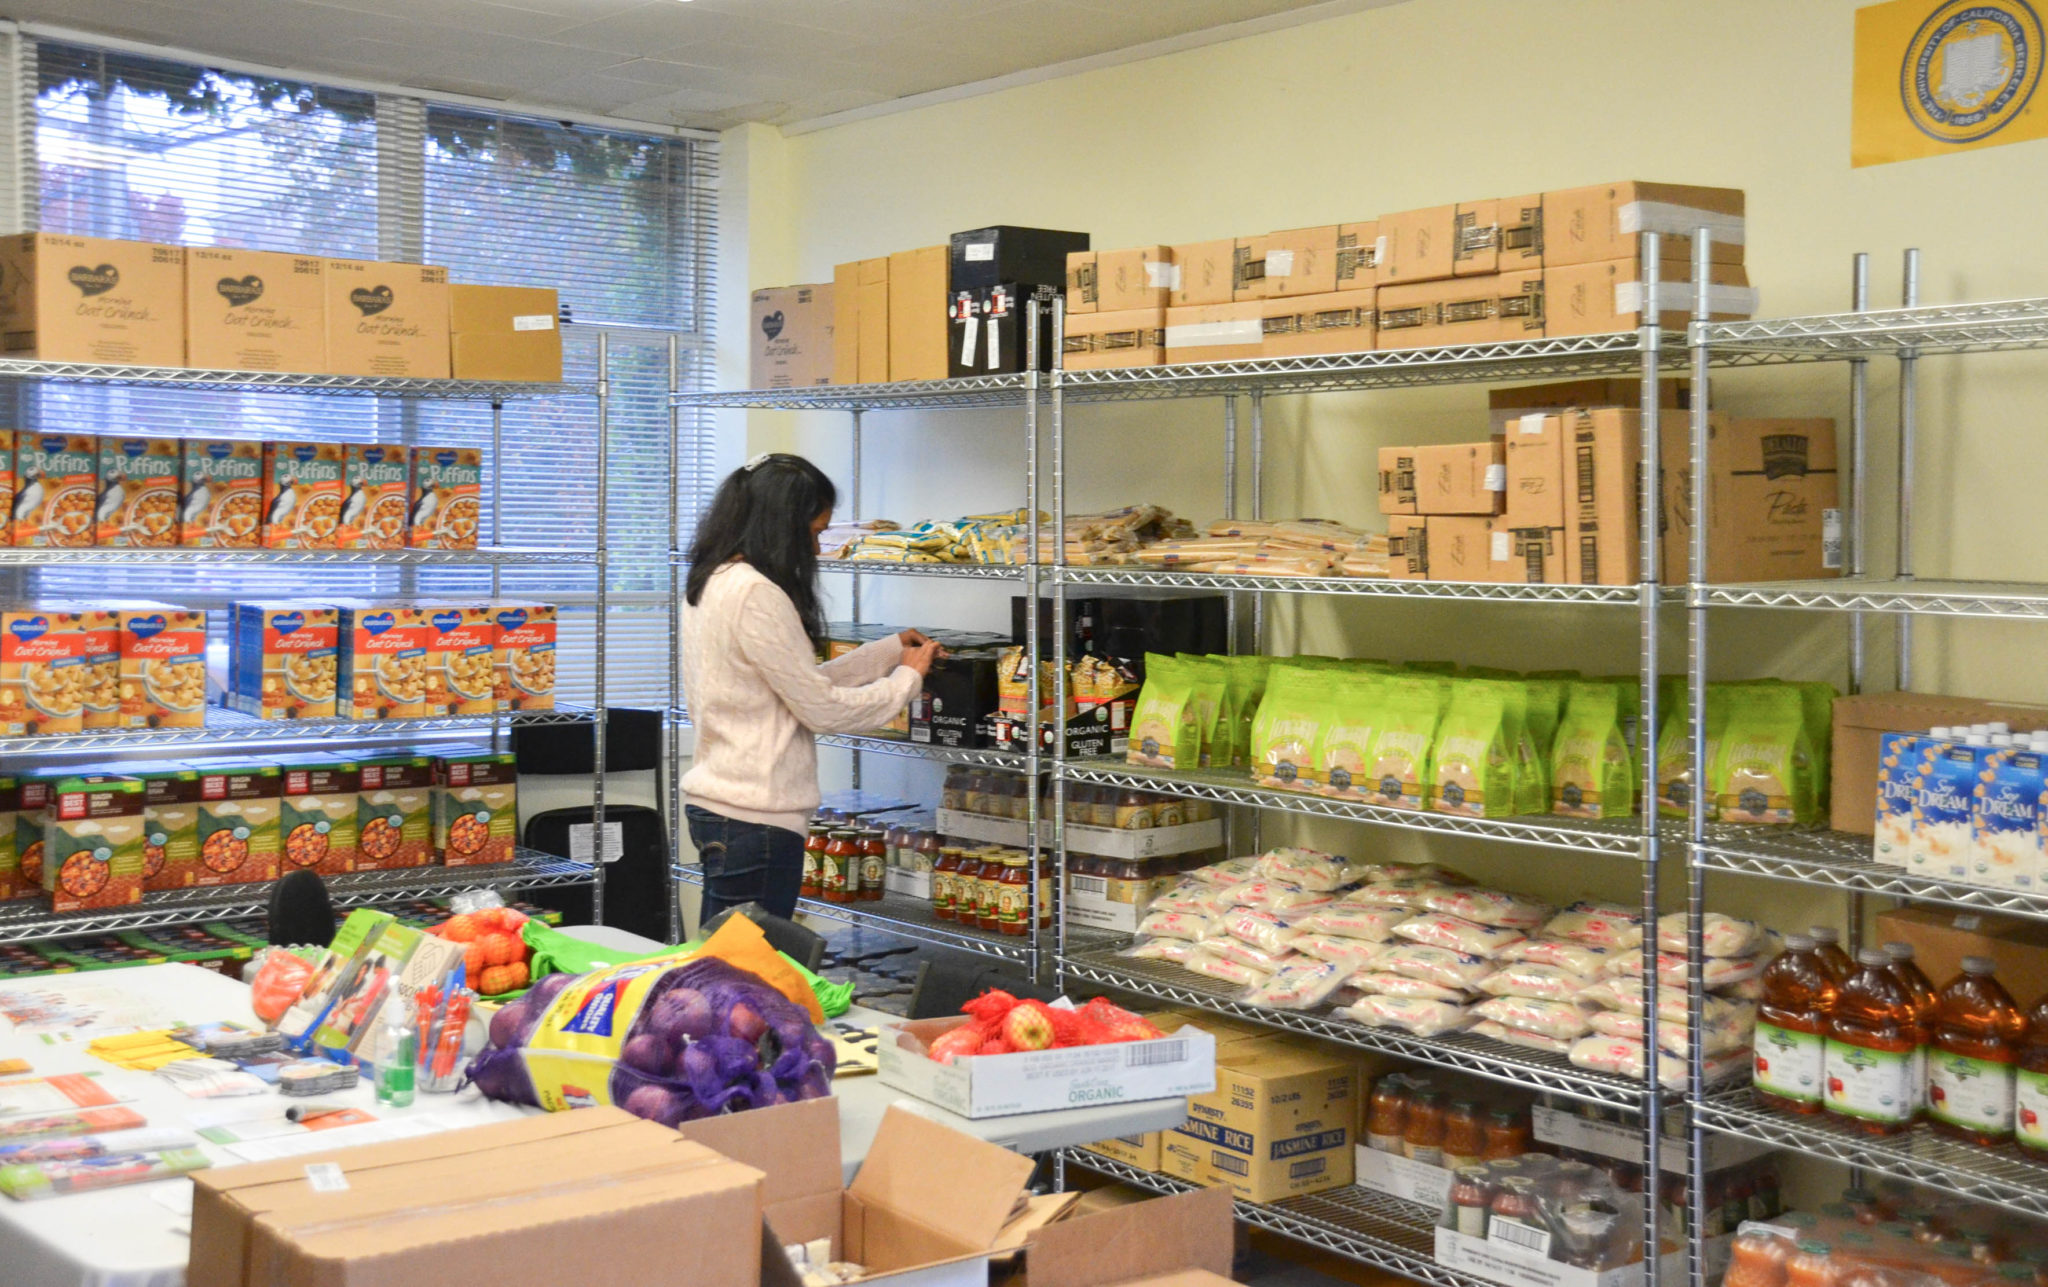 Student shops at the UC Berkeley Food Pantry, reaching towards some food items on a rack.